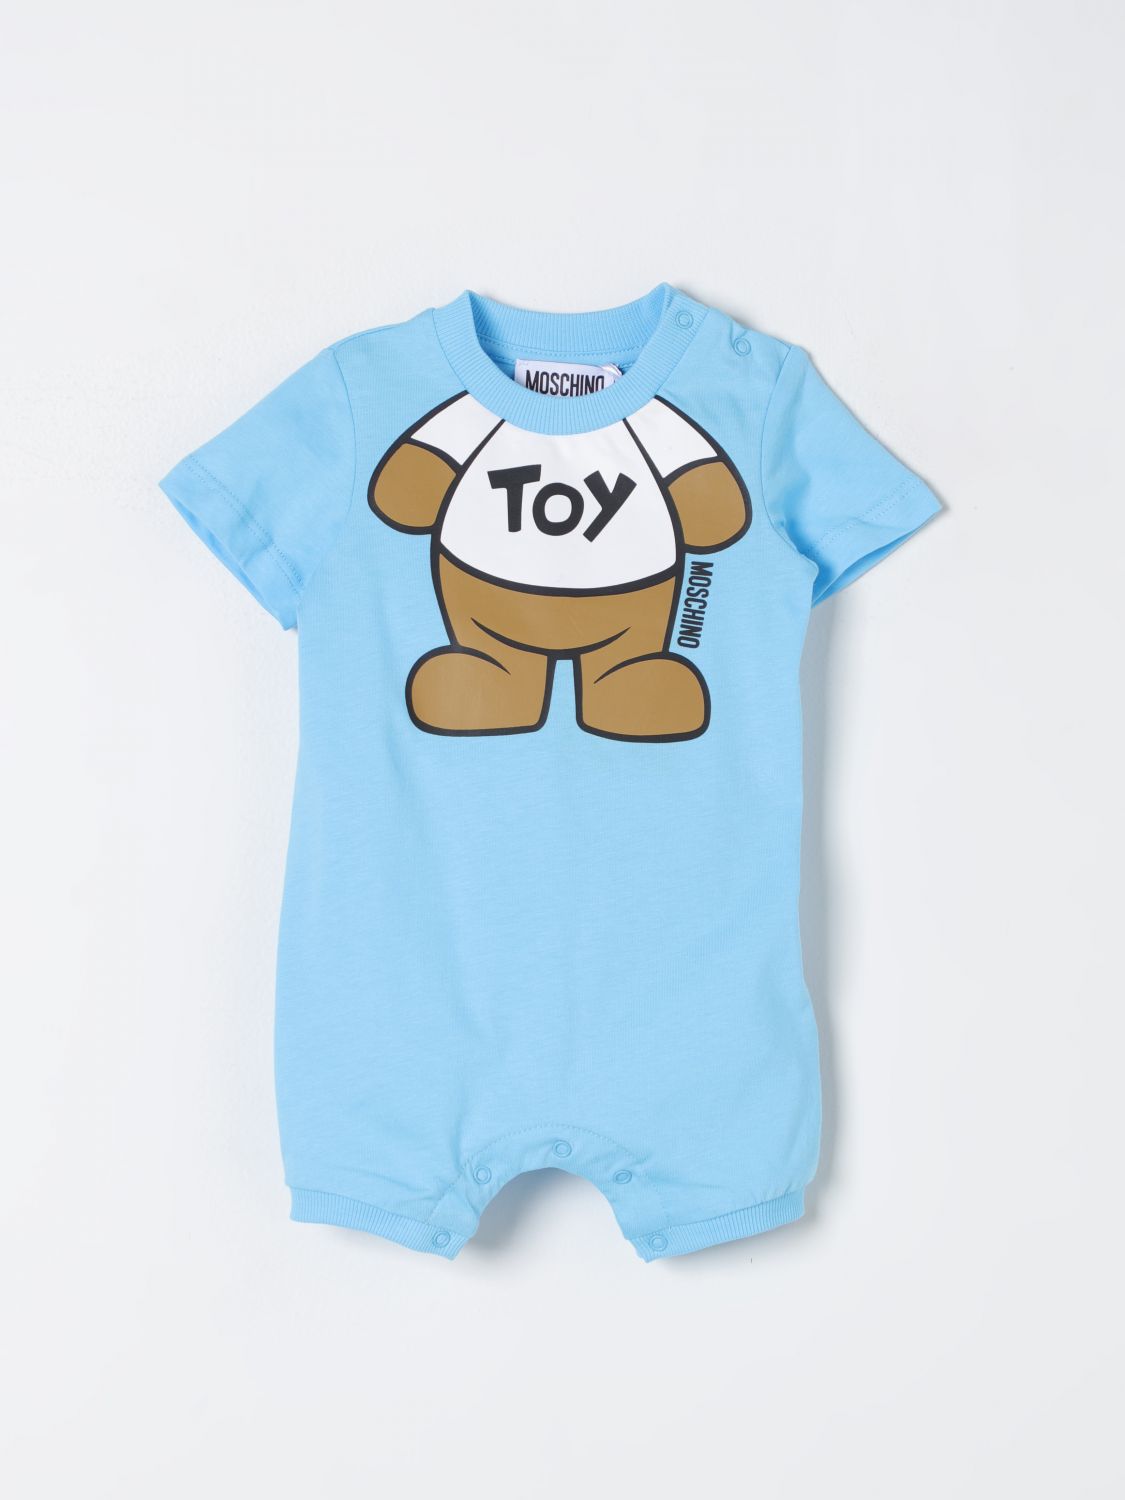 Moschino Baby Tracksuits  Kids Color Blue